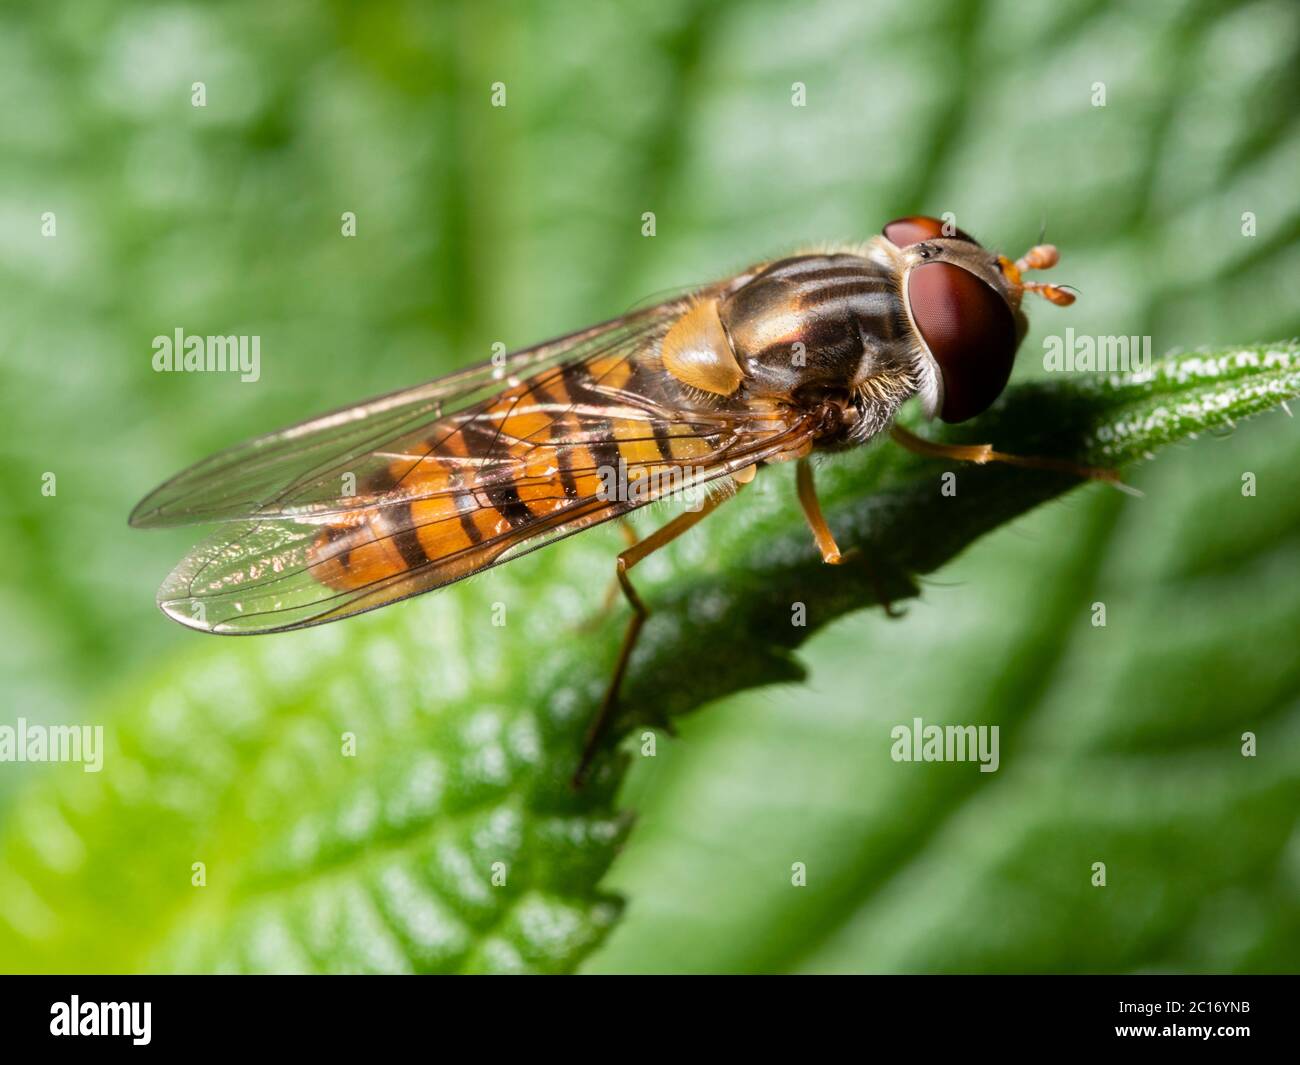 Orange and black banded adult male wasp mimic marmalade hoverfly, Episyrphus balteatus, in a UK garden Stock Photo